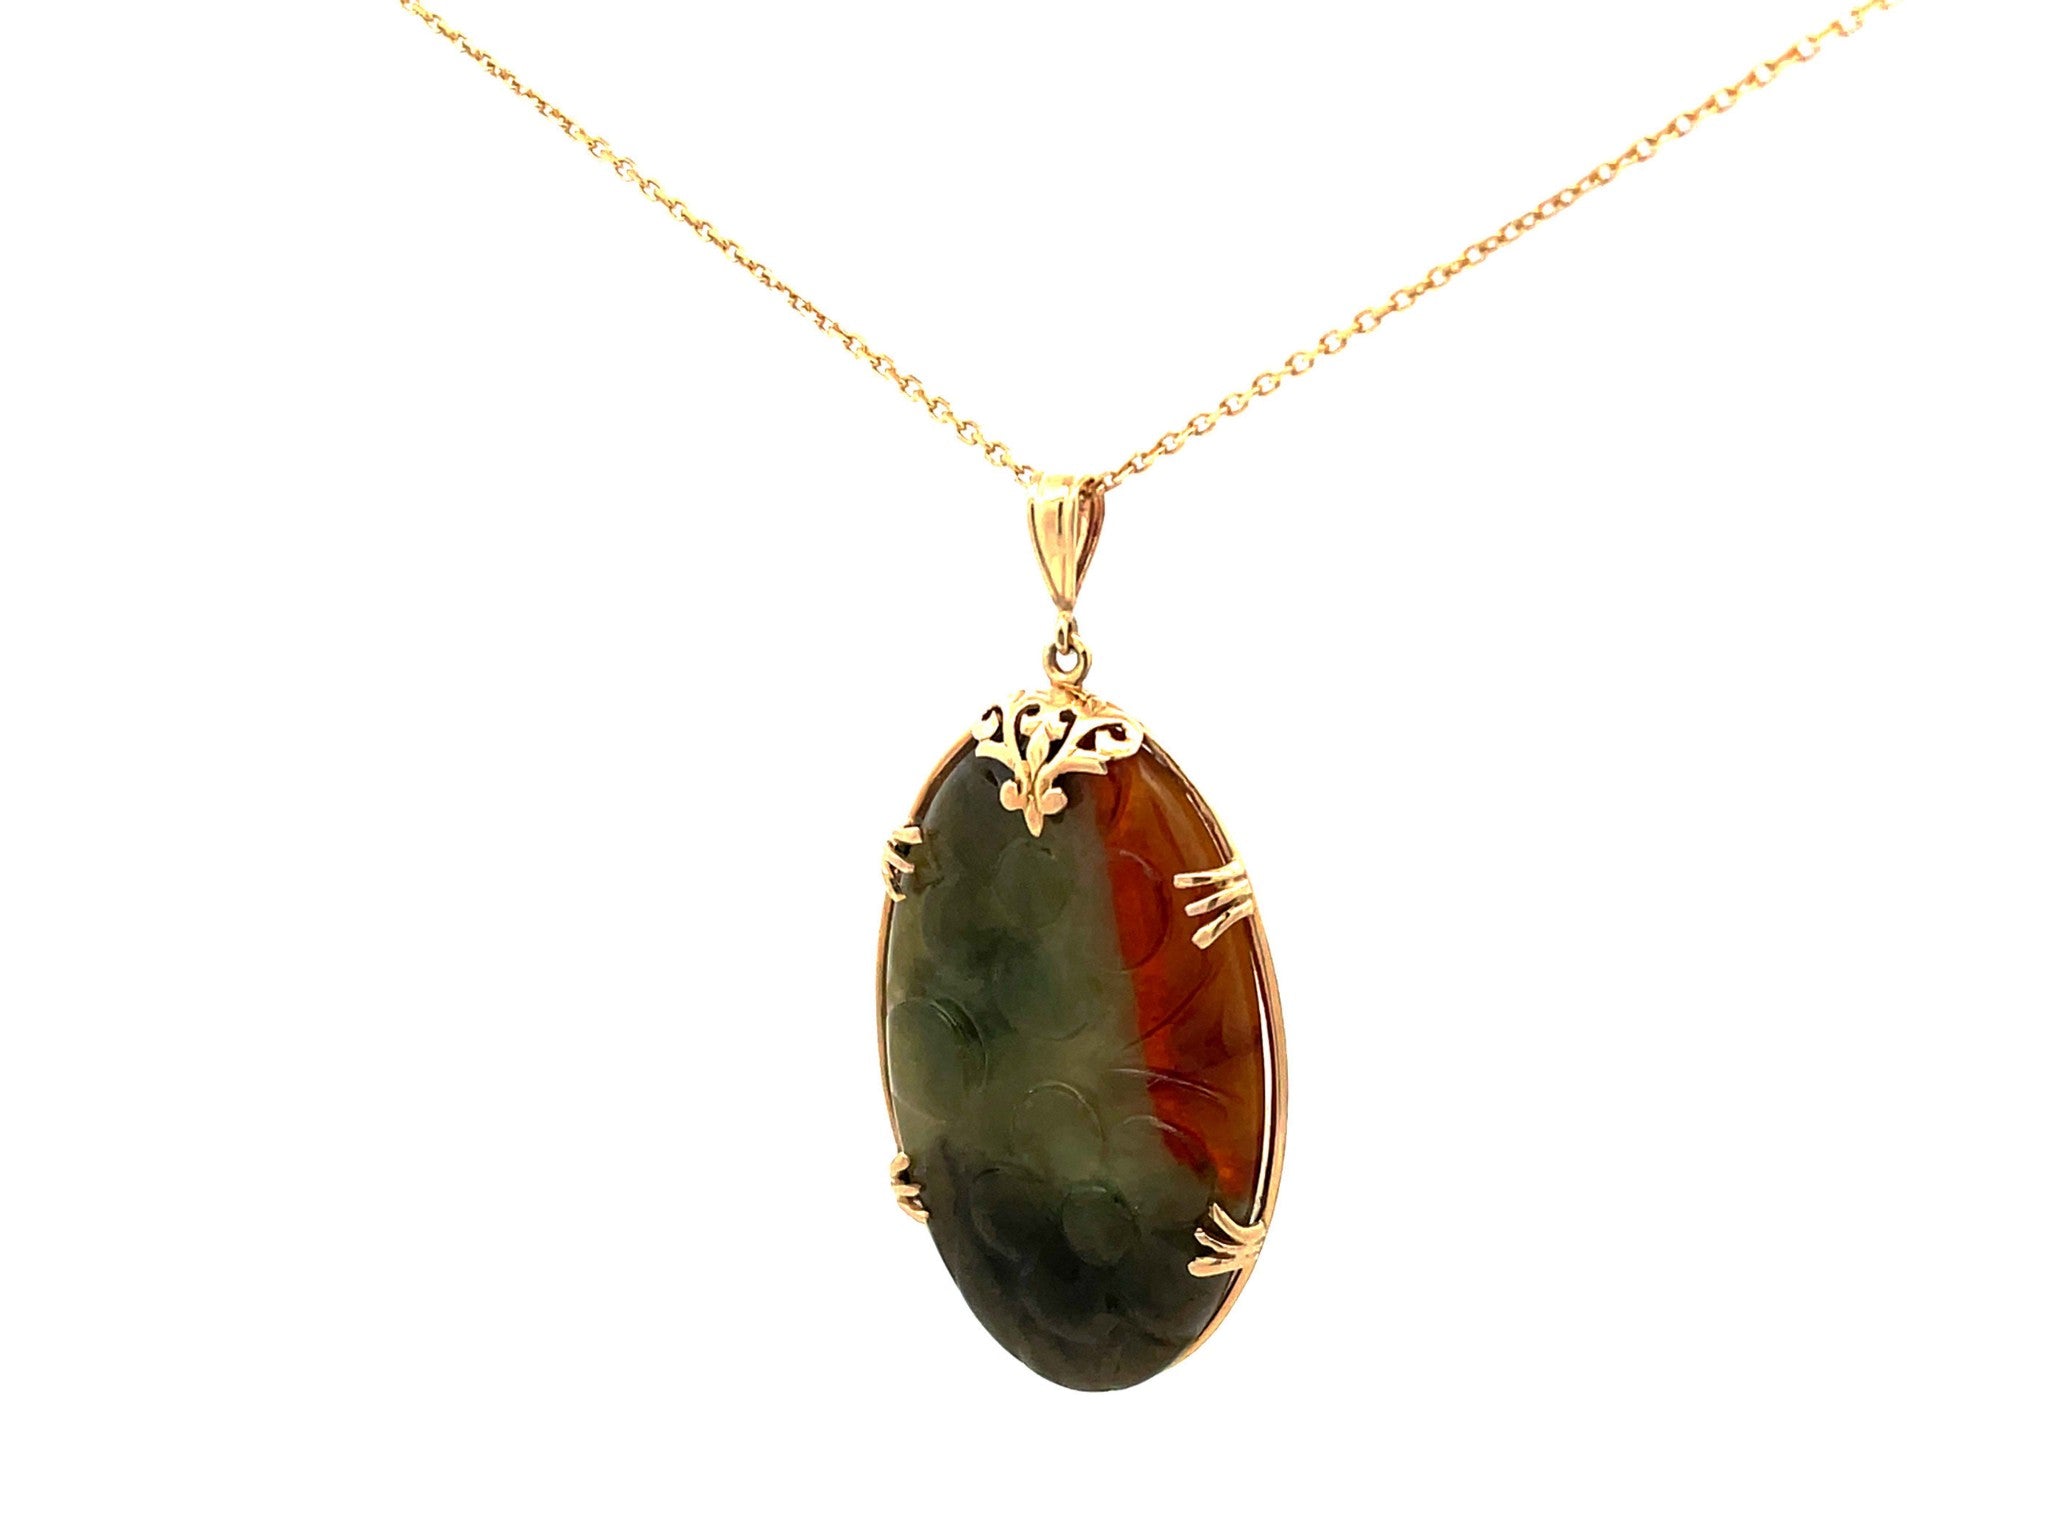 Mings Hawaii Carved Green and Red Oval Jade Pendant and Chain in 14k Yellow Gold